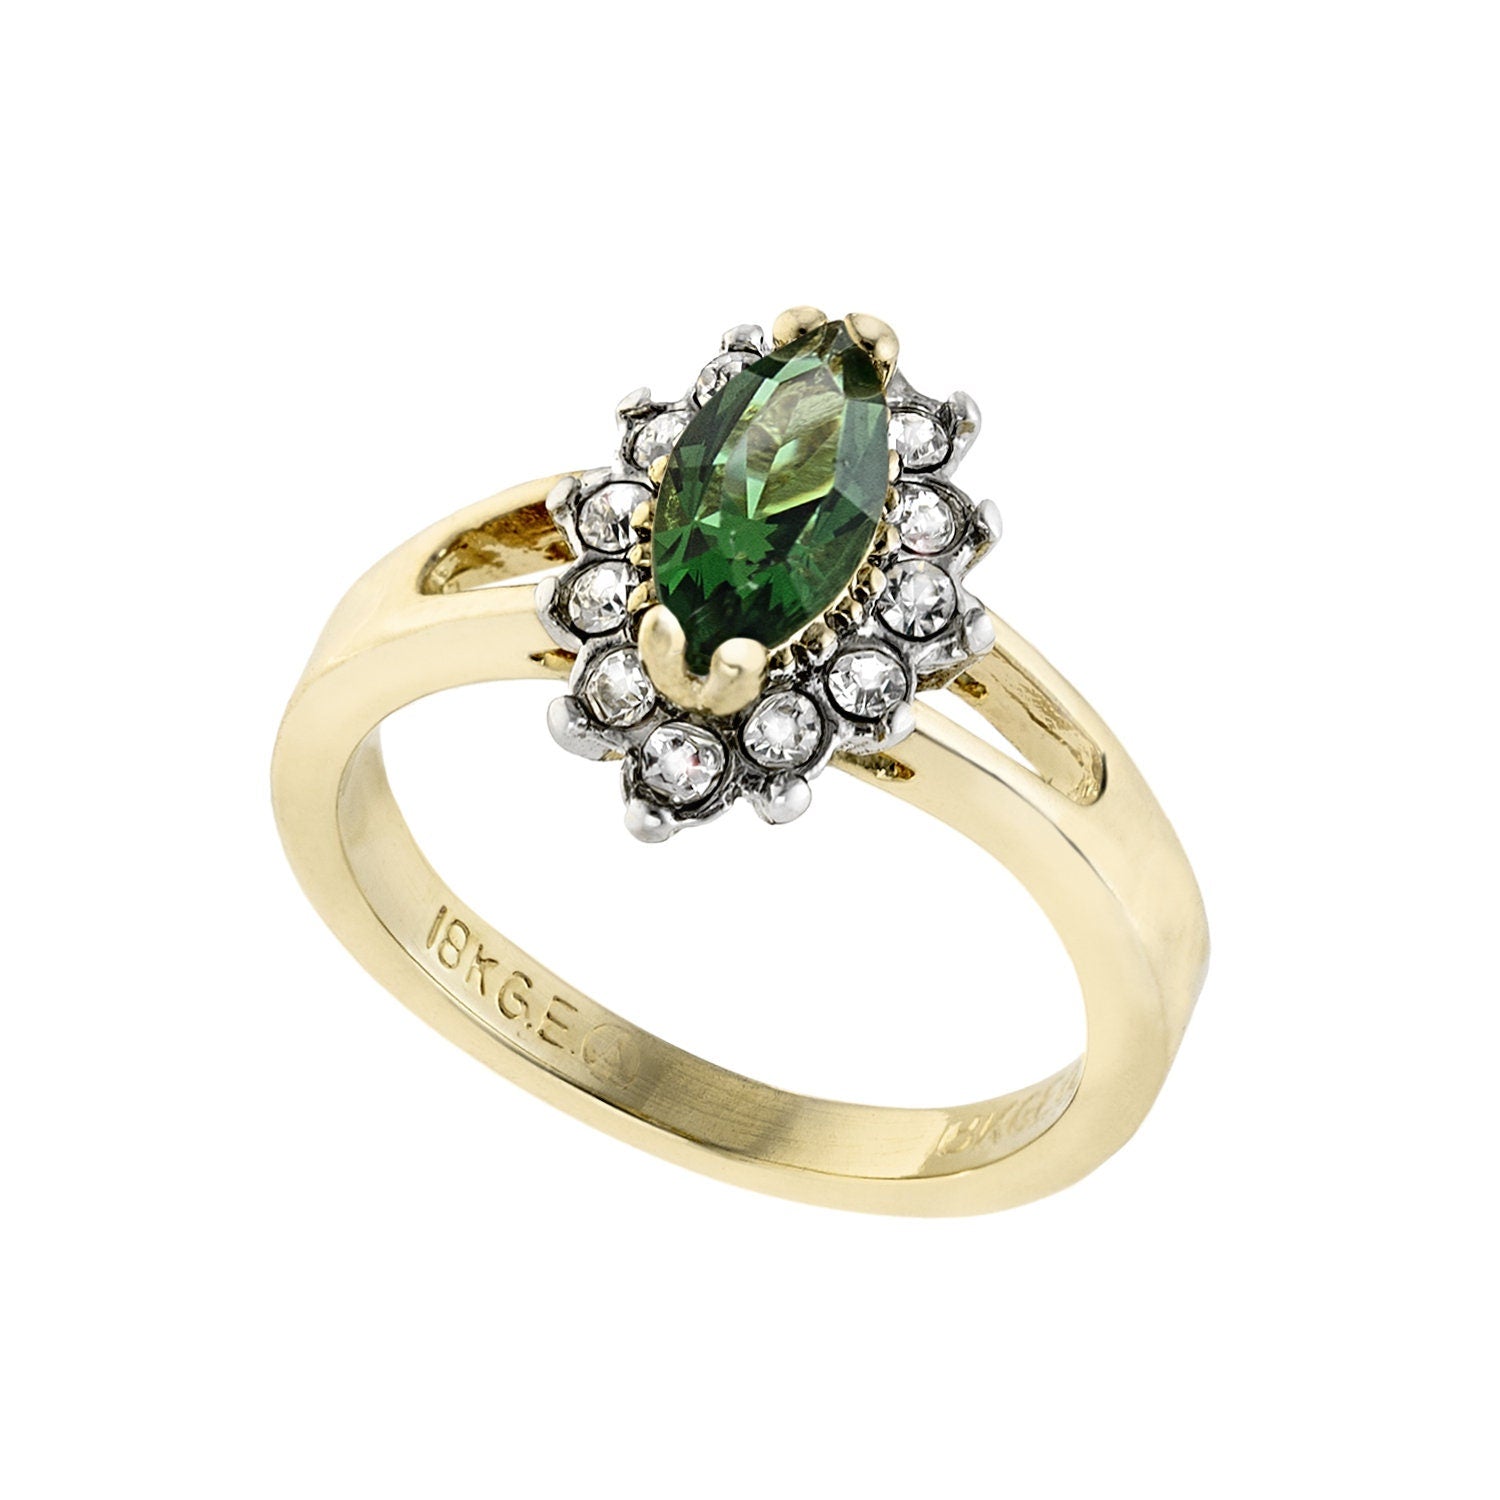 Vintage Ring Green Tourmaline and Clear Swarovski Crystals 18kt Gold #R1314 - Limited Stock - Never Worn